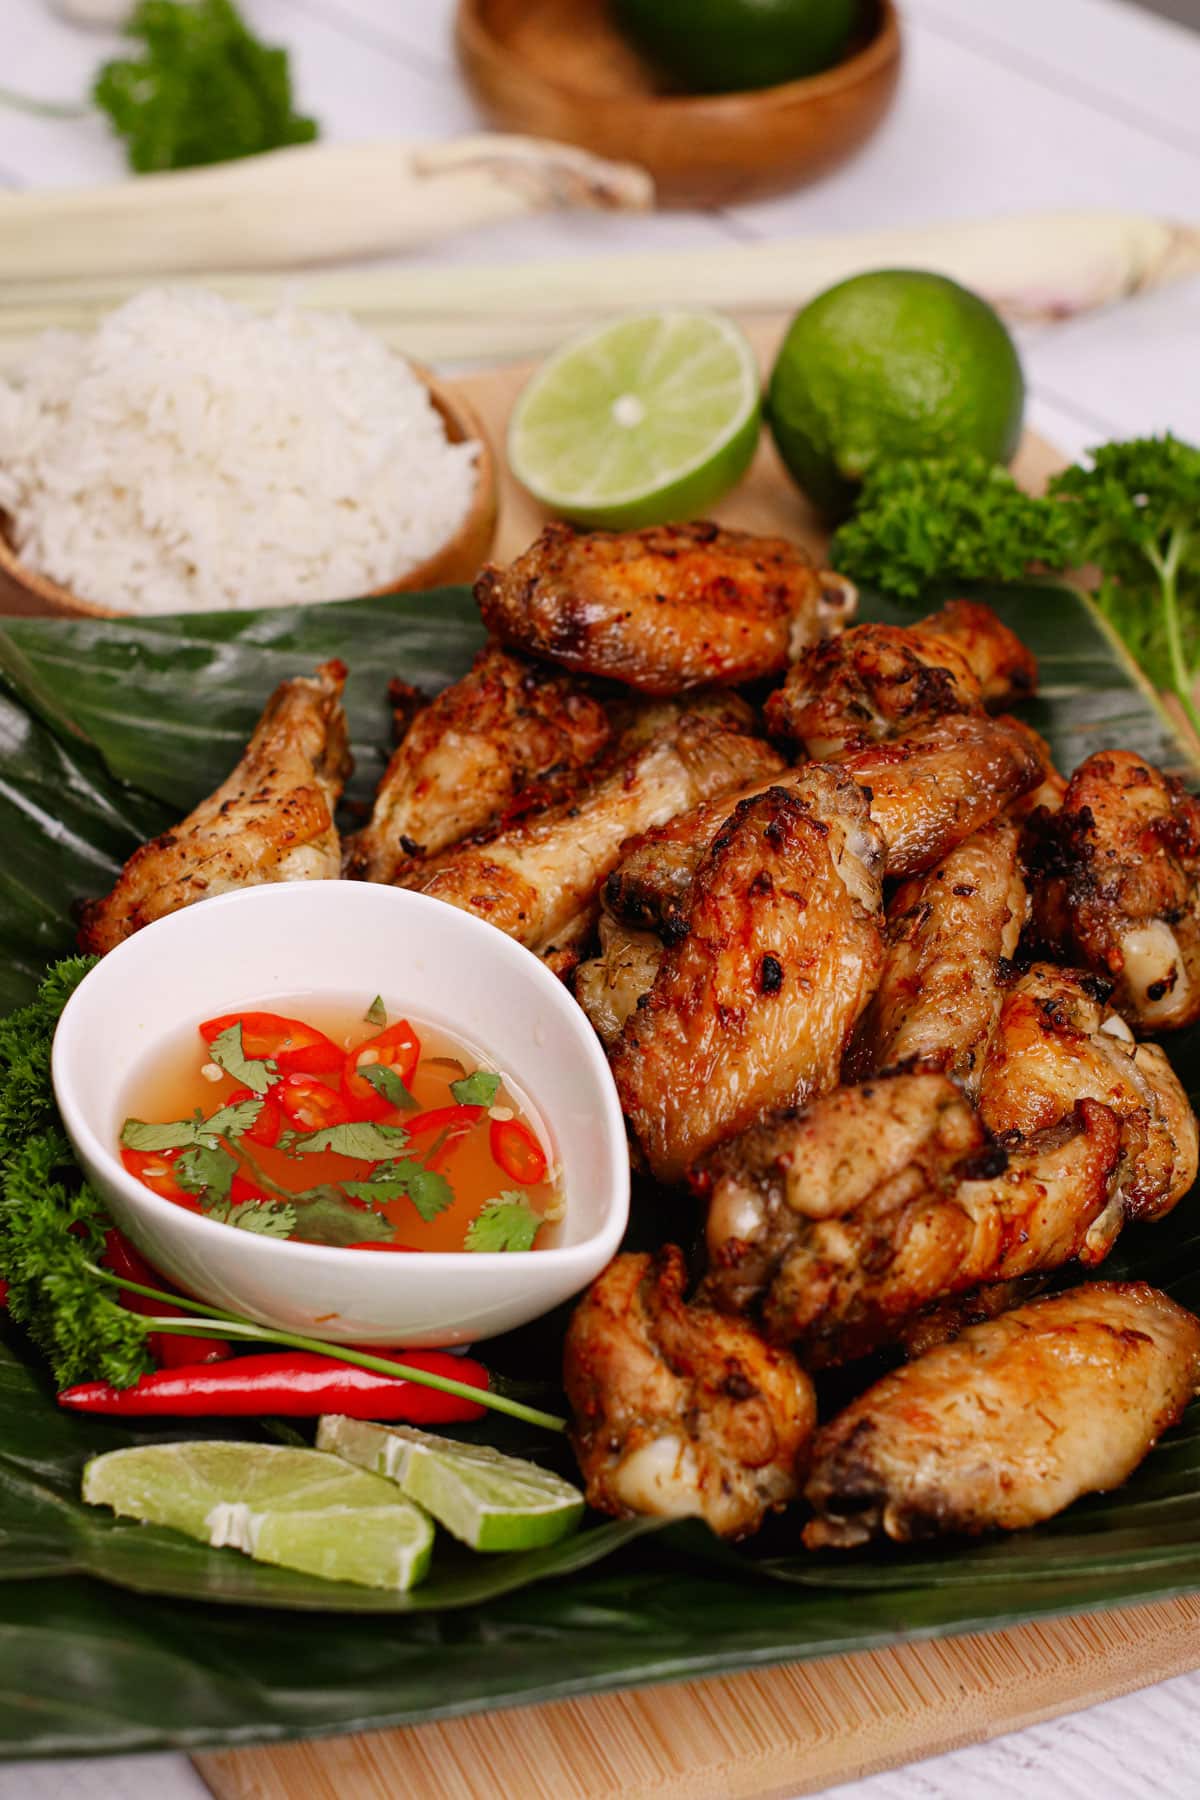 Air fryer lemongrass chicken wings recipe bite shot, served on a banana leaf with Thai savory and spicy dip and rice on the background.